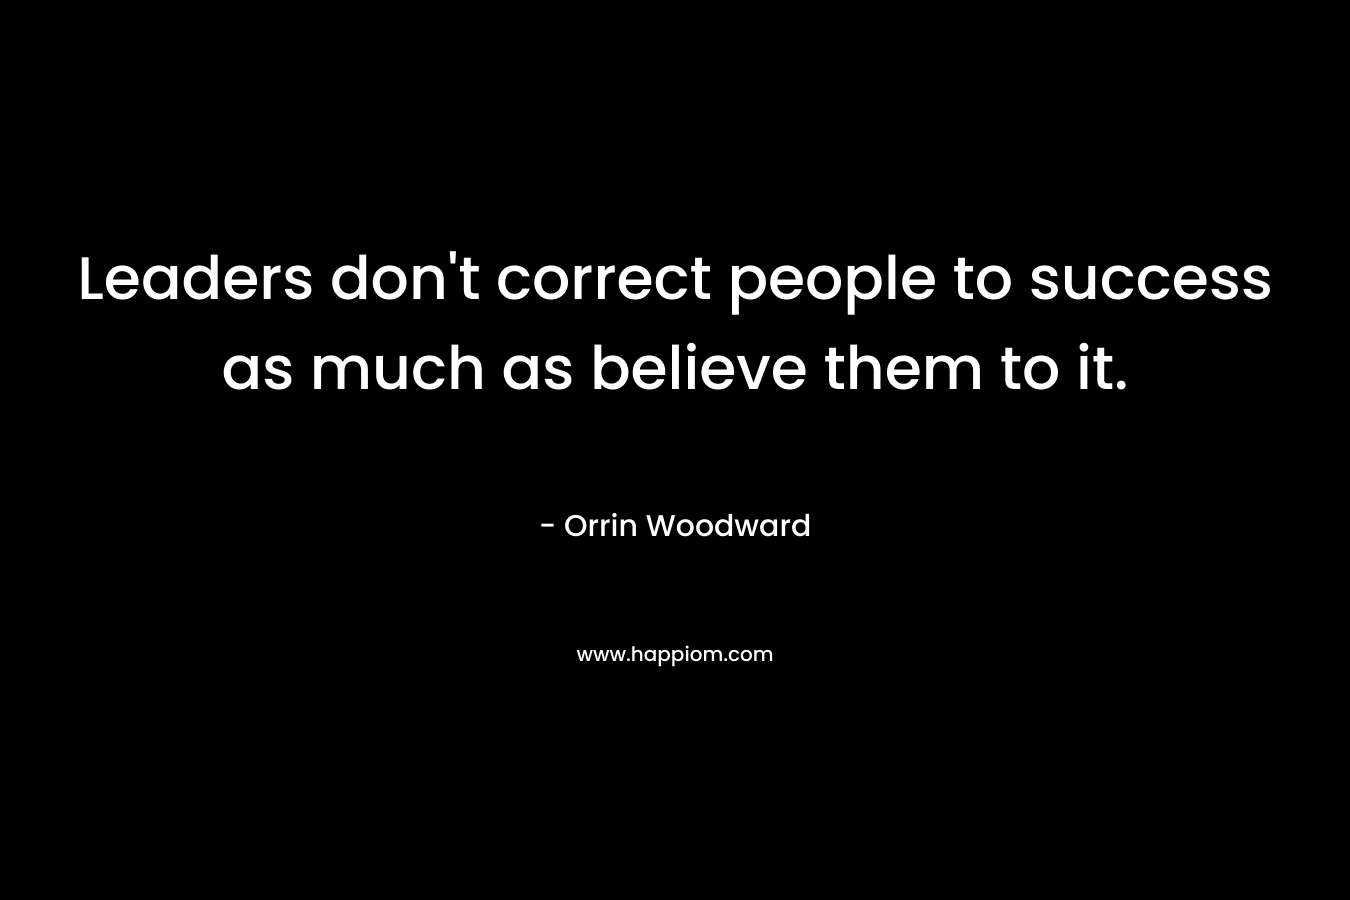 Leaders don't correct people to success as much as believe them to it.